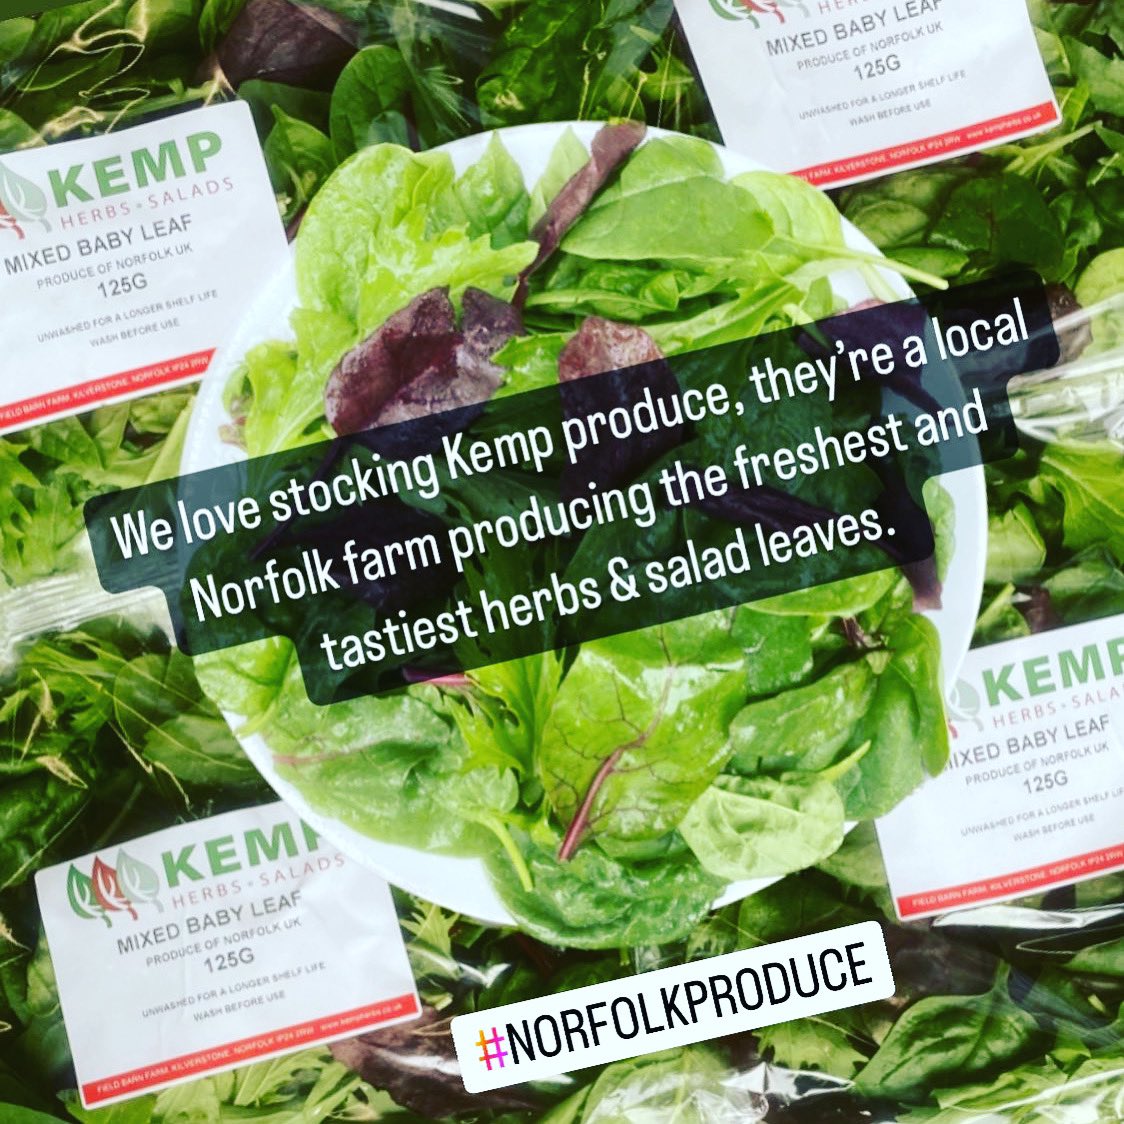 Kemp Herbs & Salads are so fresh and tasty, those who know - know!! 😉
#localsalad #norfolkproduce #freshfood